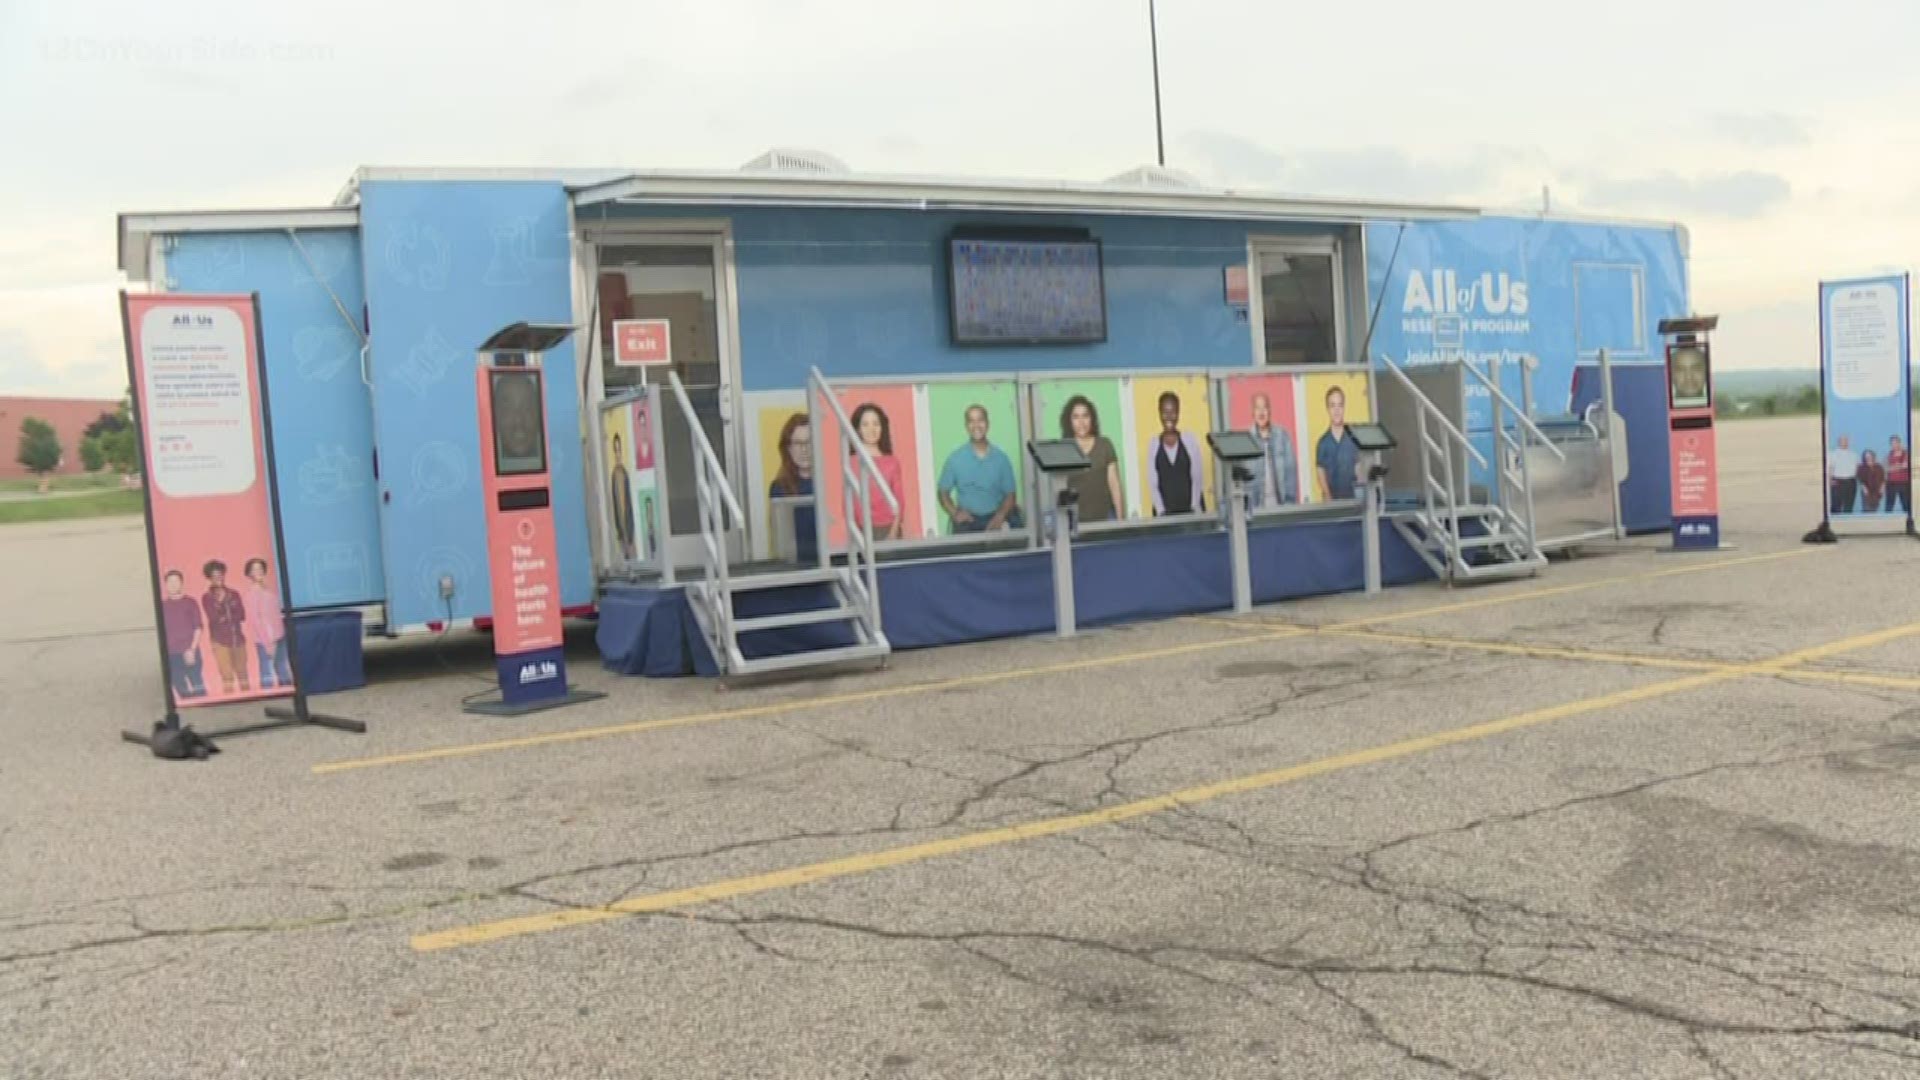 All Of Us Journey bus makes a stop in Grand Rapids